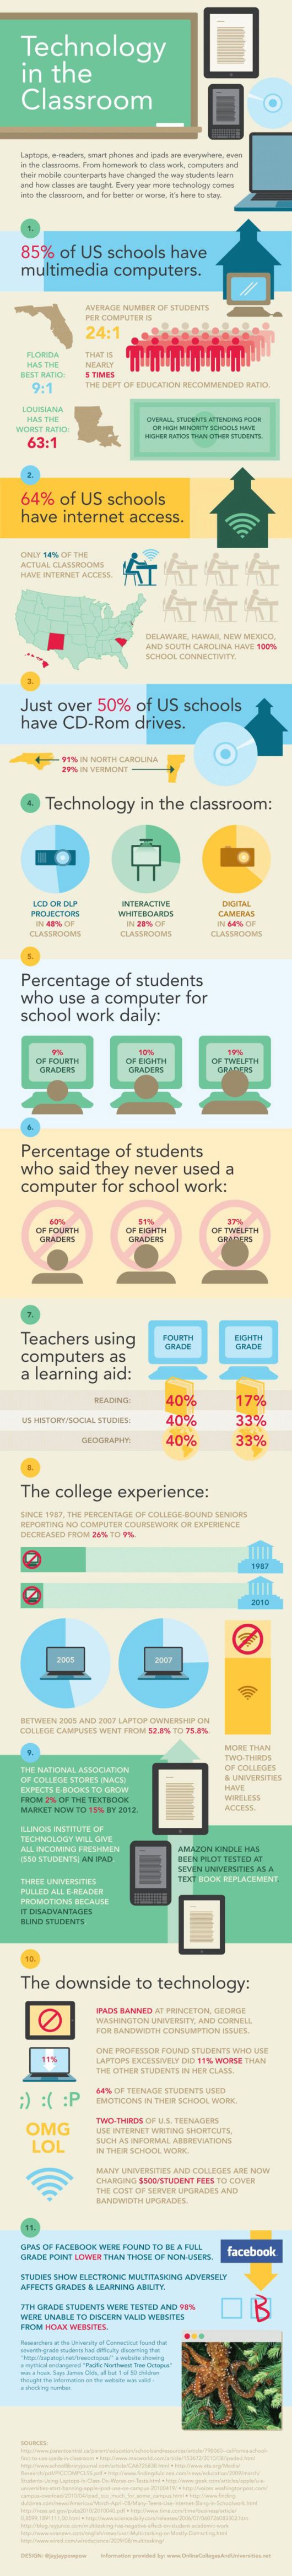 Technology In The Classroom